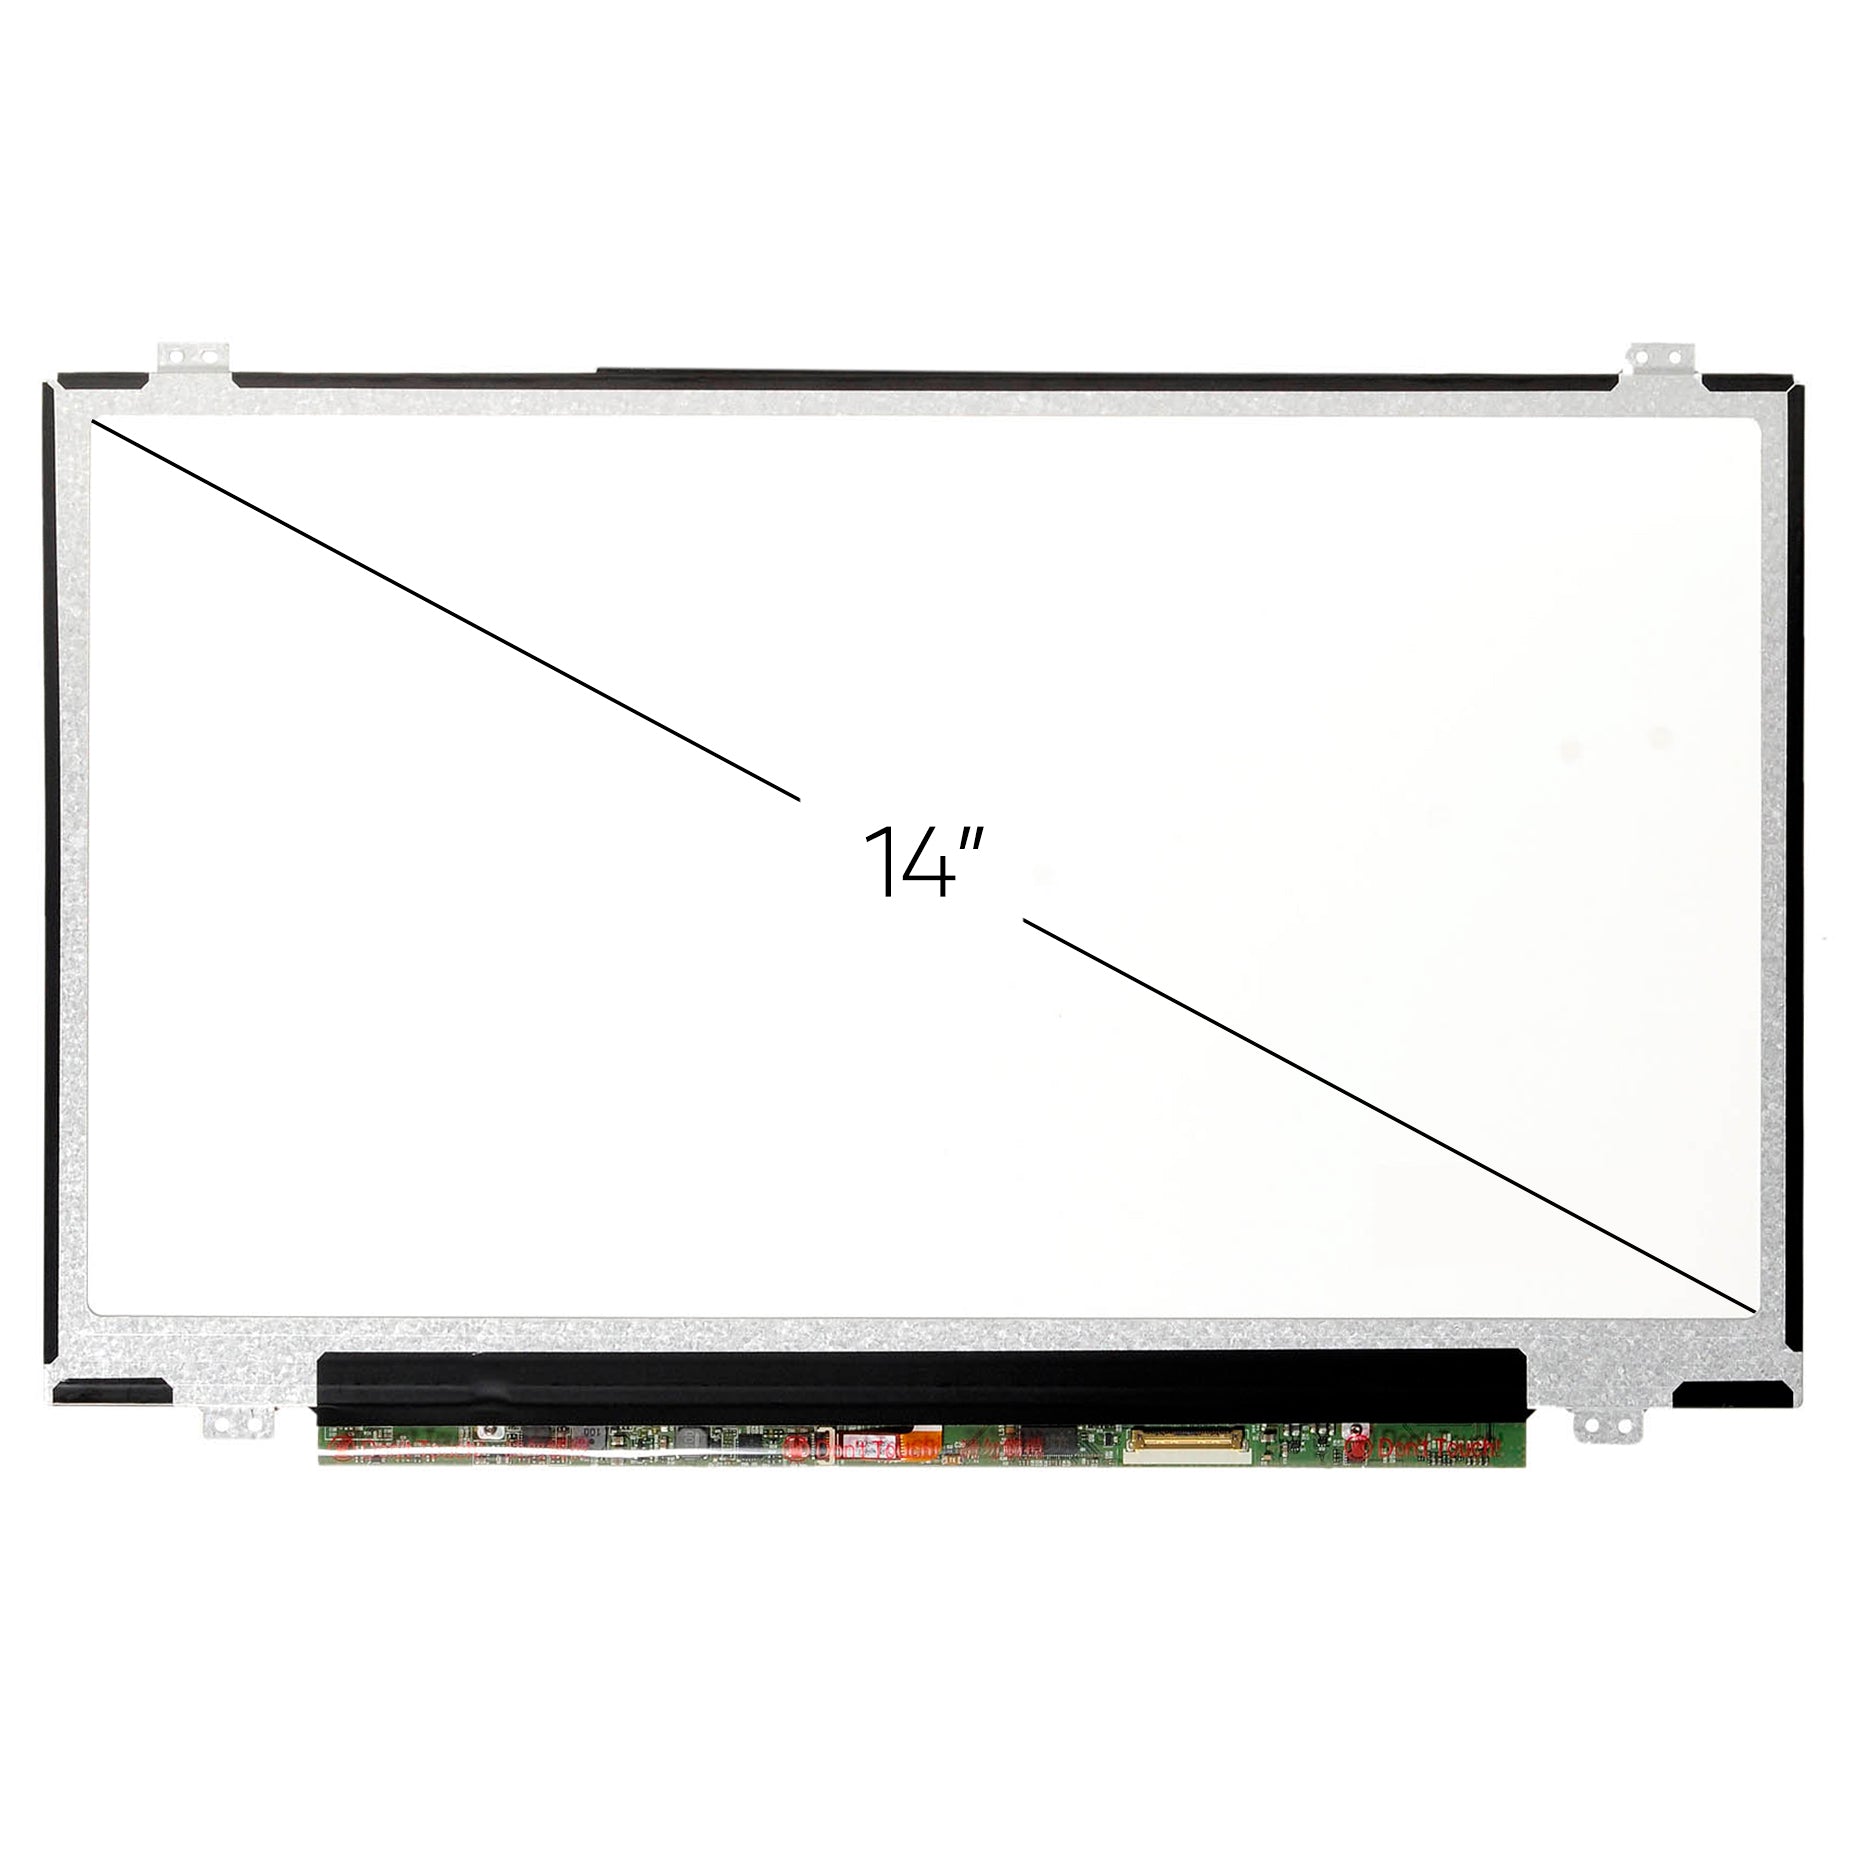 Screen Replacement for HP Chromebook 14-CA051WM FHD 1920x1080 IPS Matte LCD LED Display